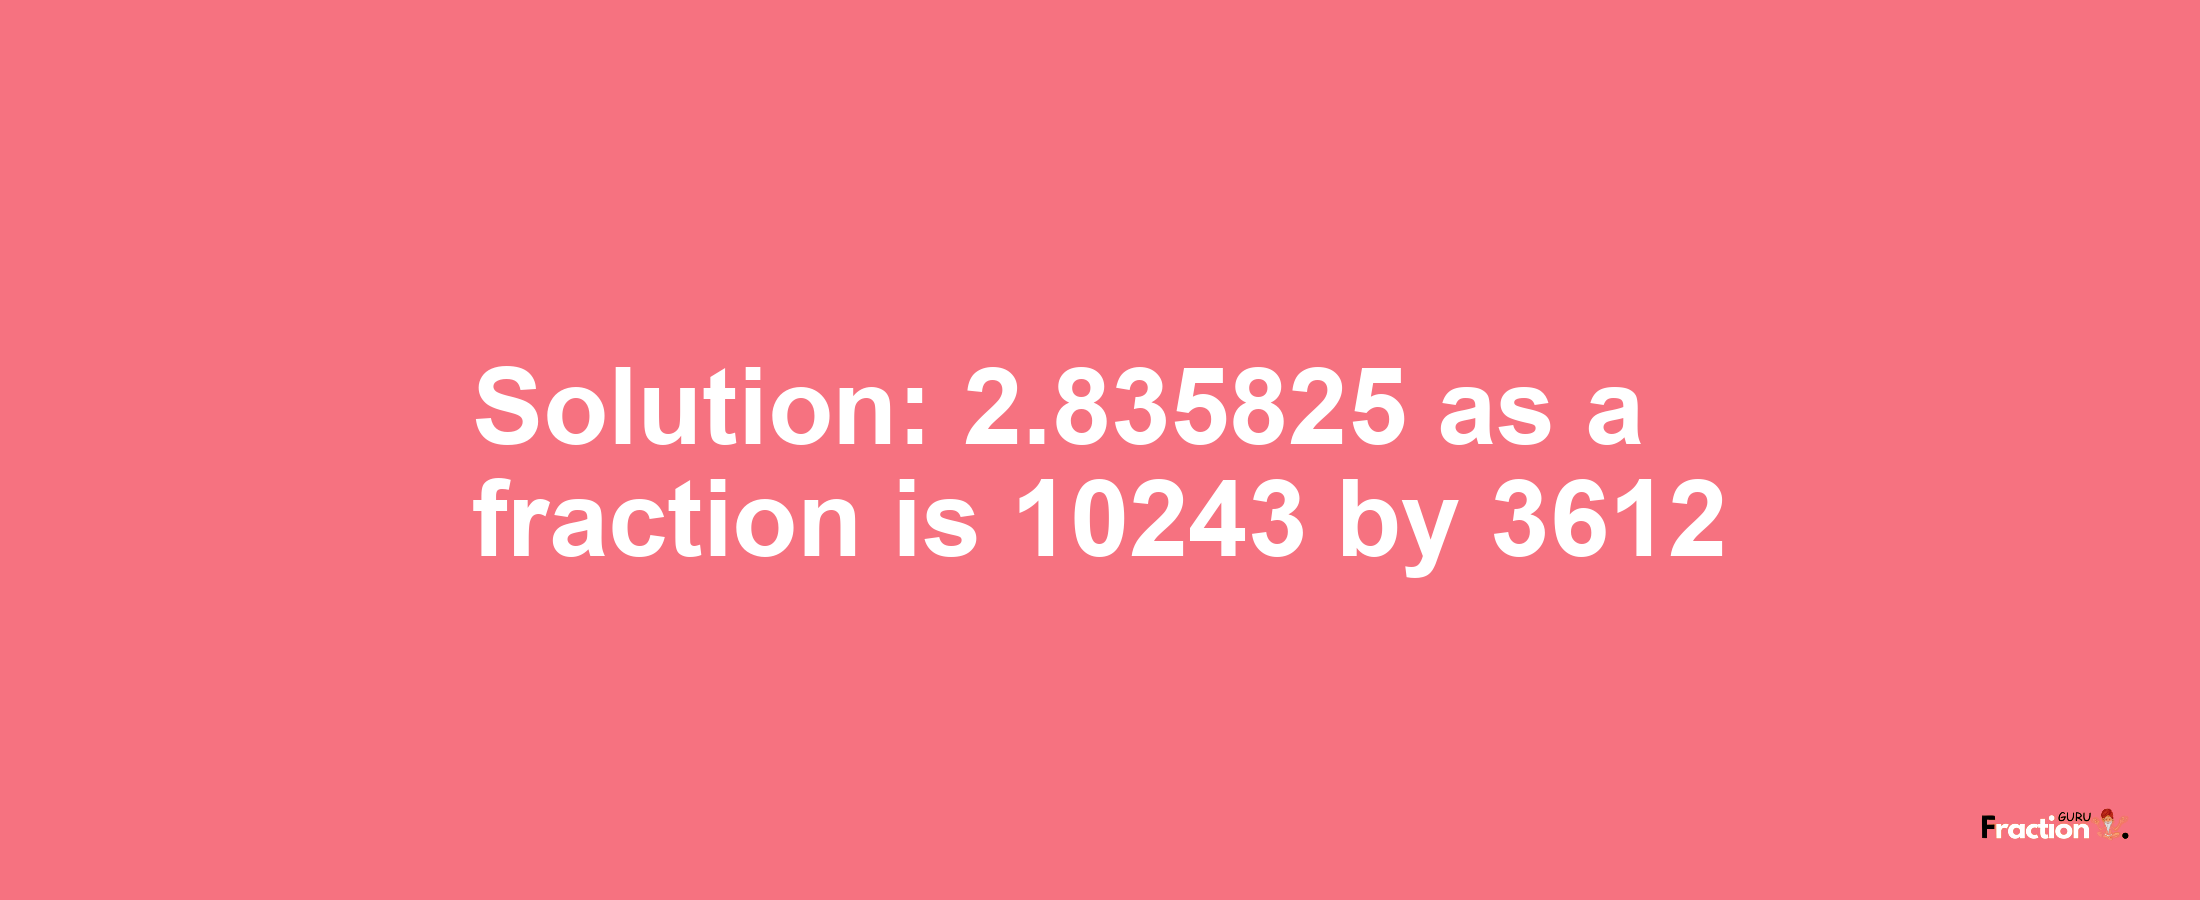 Solution:2.835825 as a fraction is 10243/3612